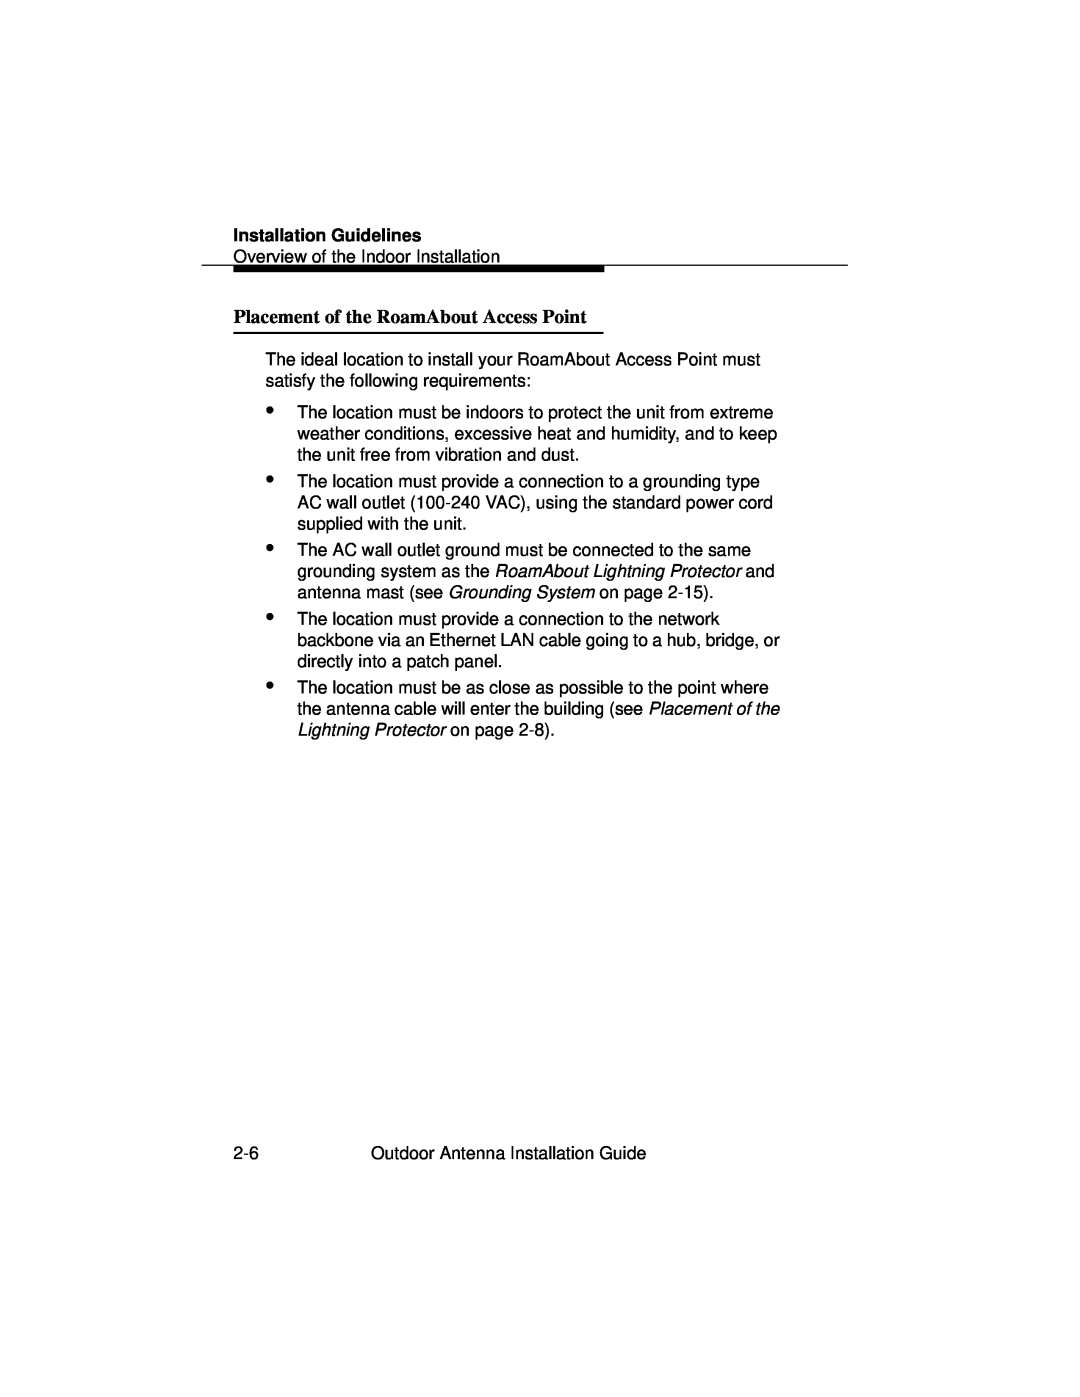 Cabletron Systems 9033073 manual Placement of the RoamAbout Access Point, Installation Guidelines 